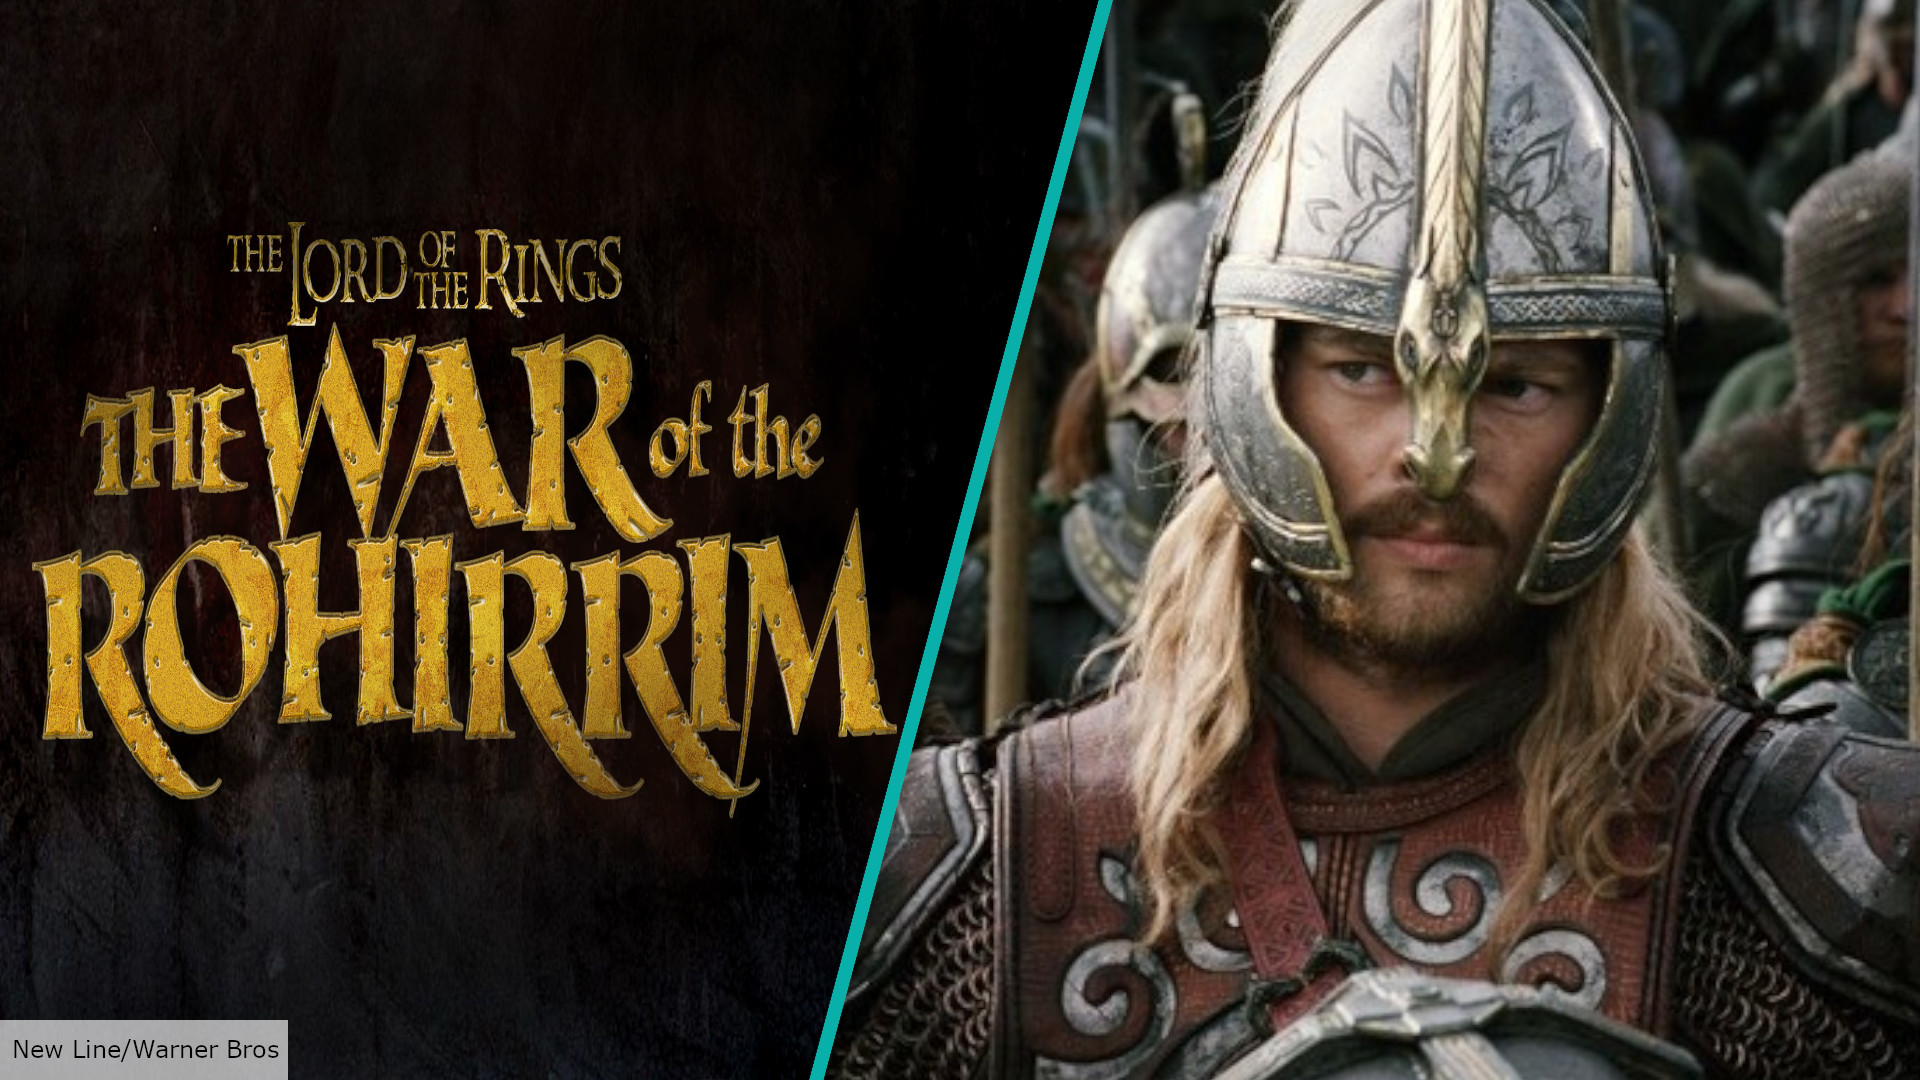 New WB Lord of the Rings movies! Rohirrim! Angmar? Will Peter